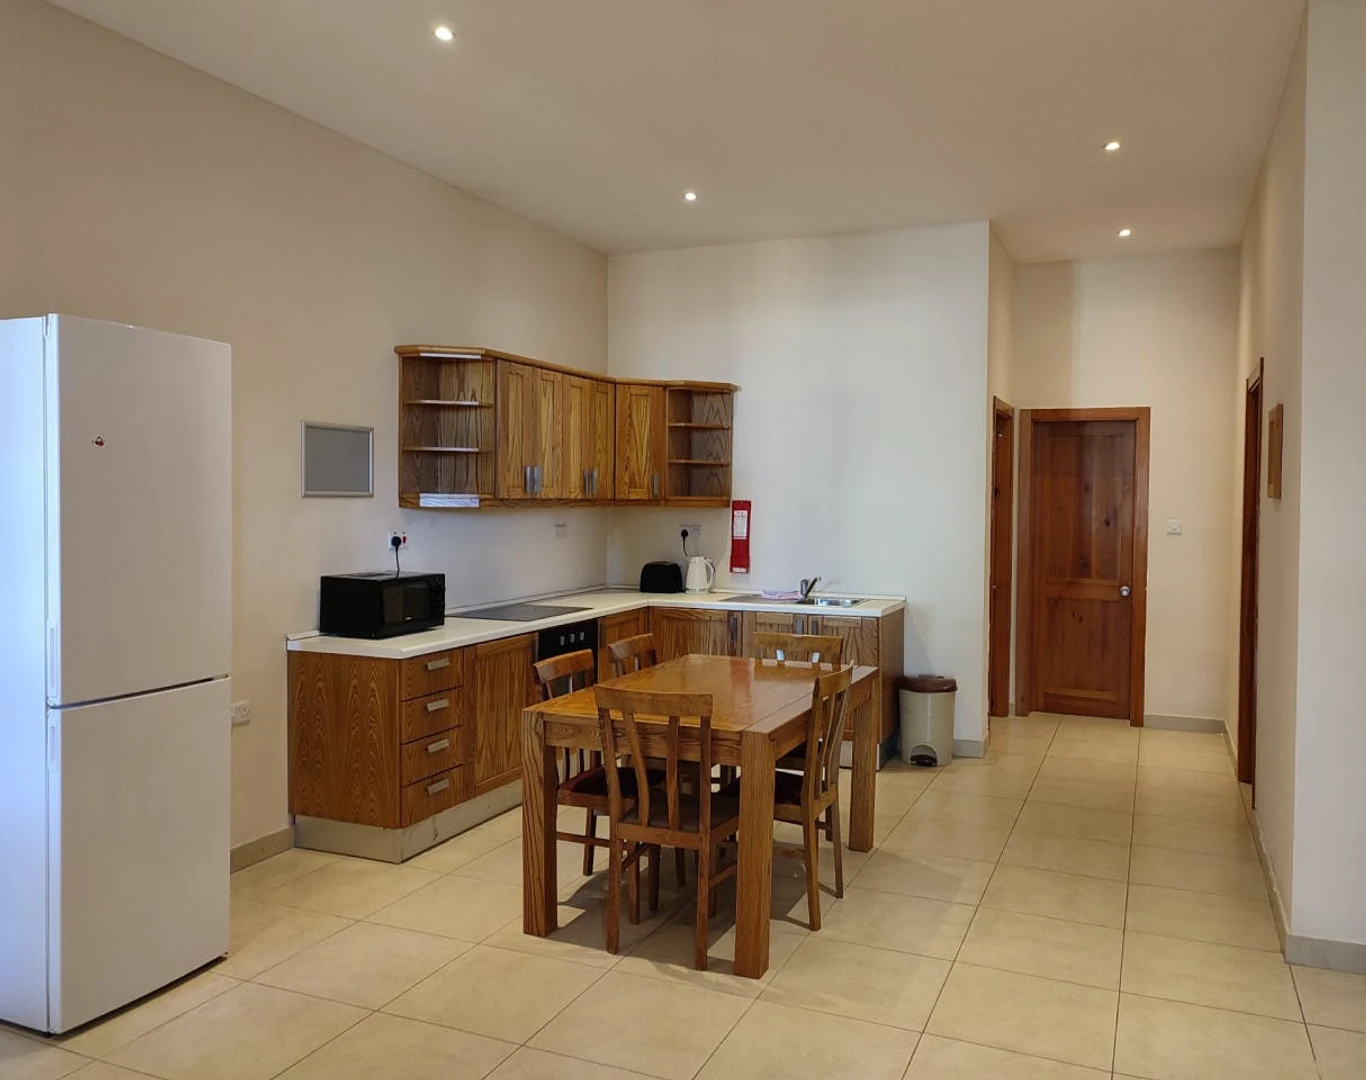 Renting rooms by the month in Malta